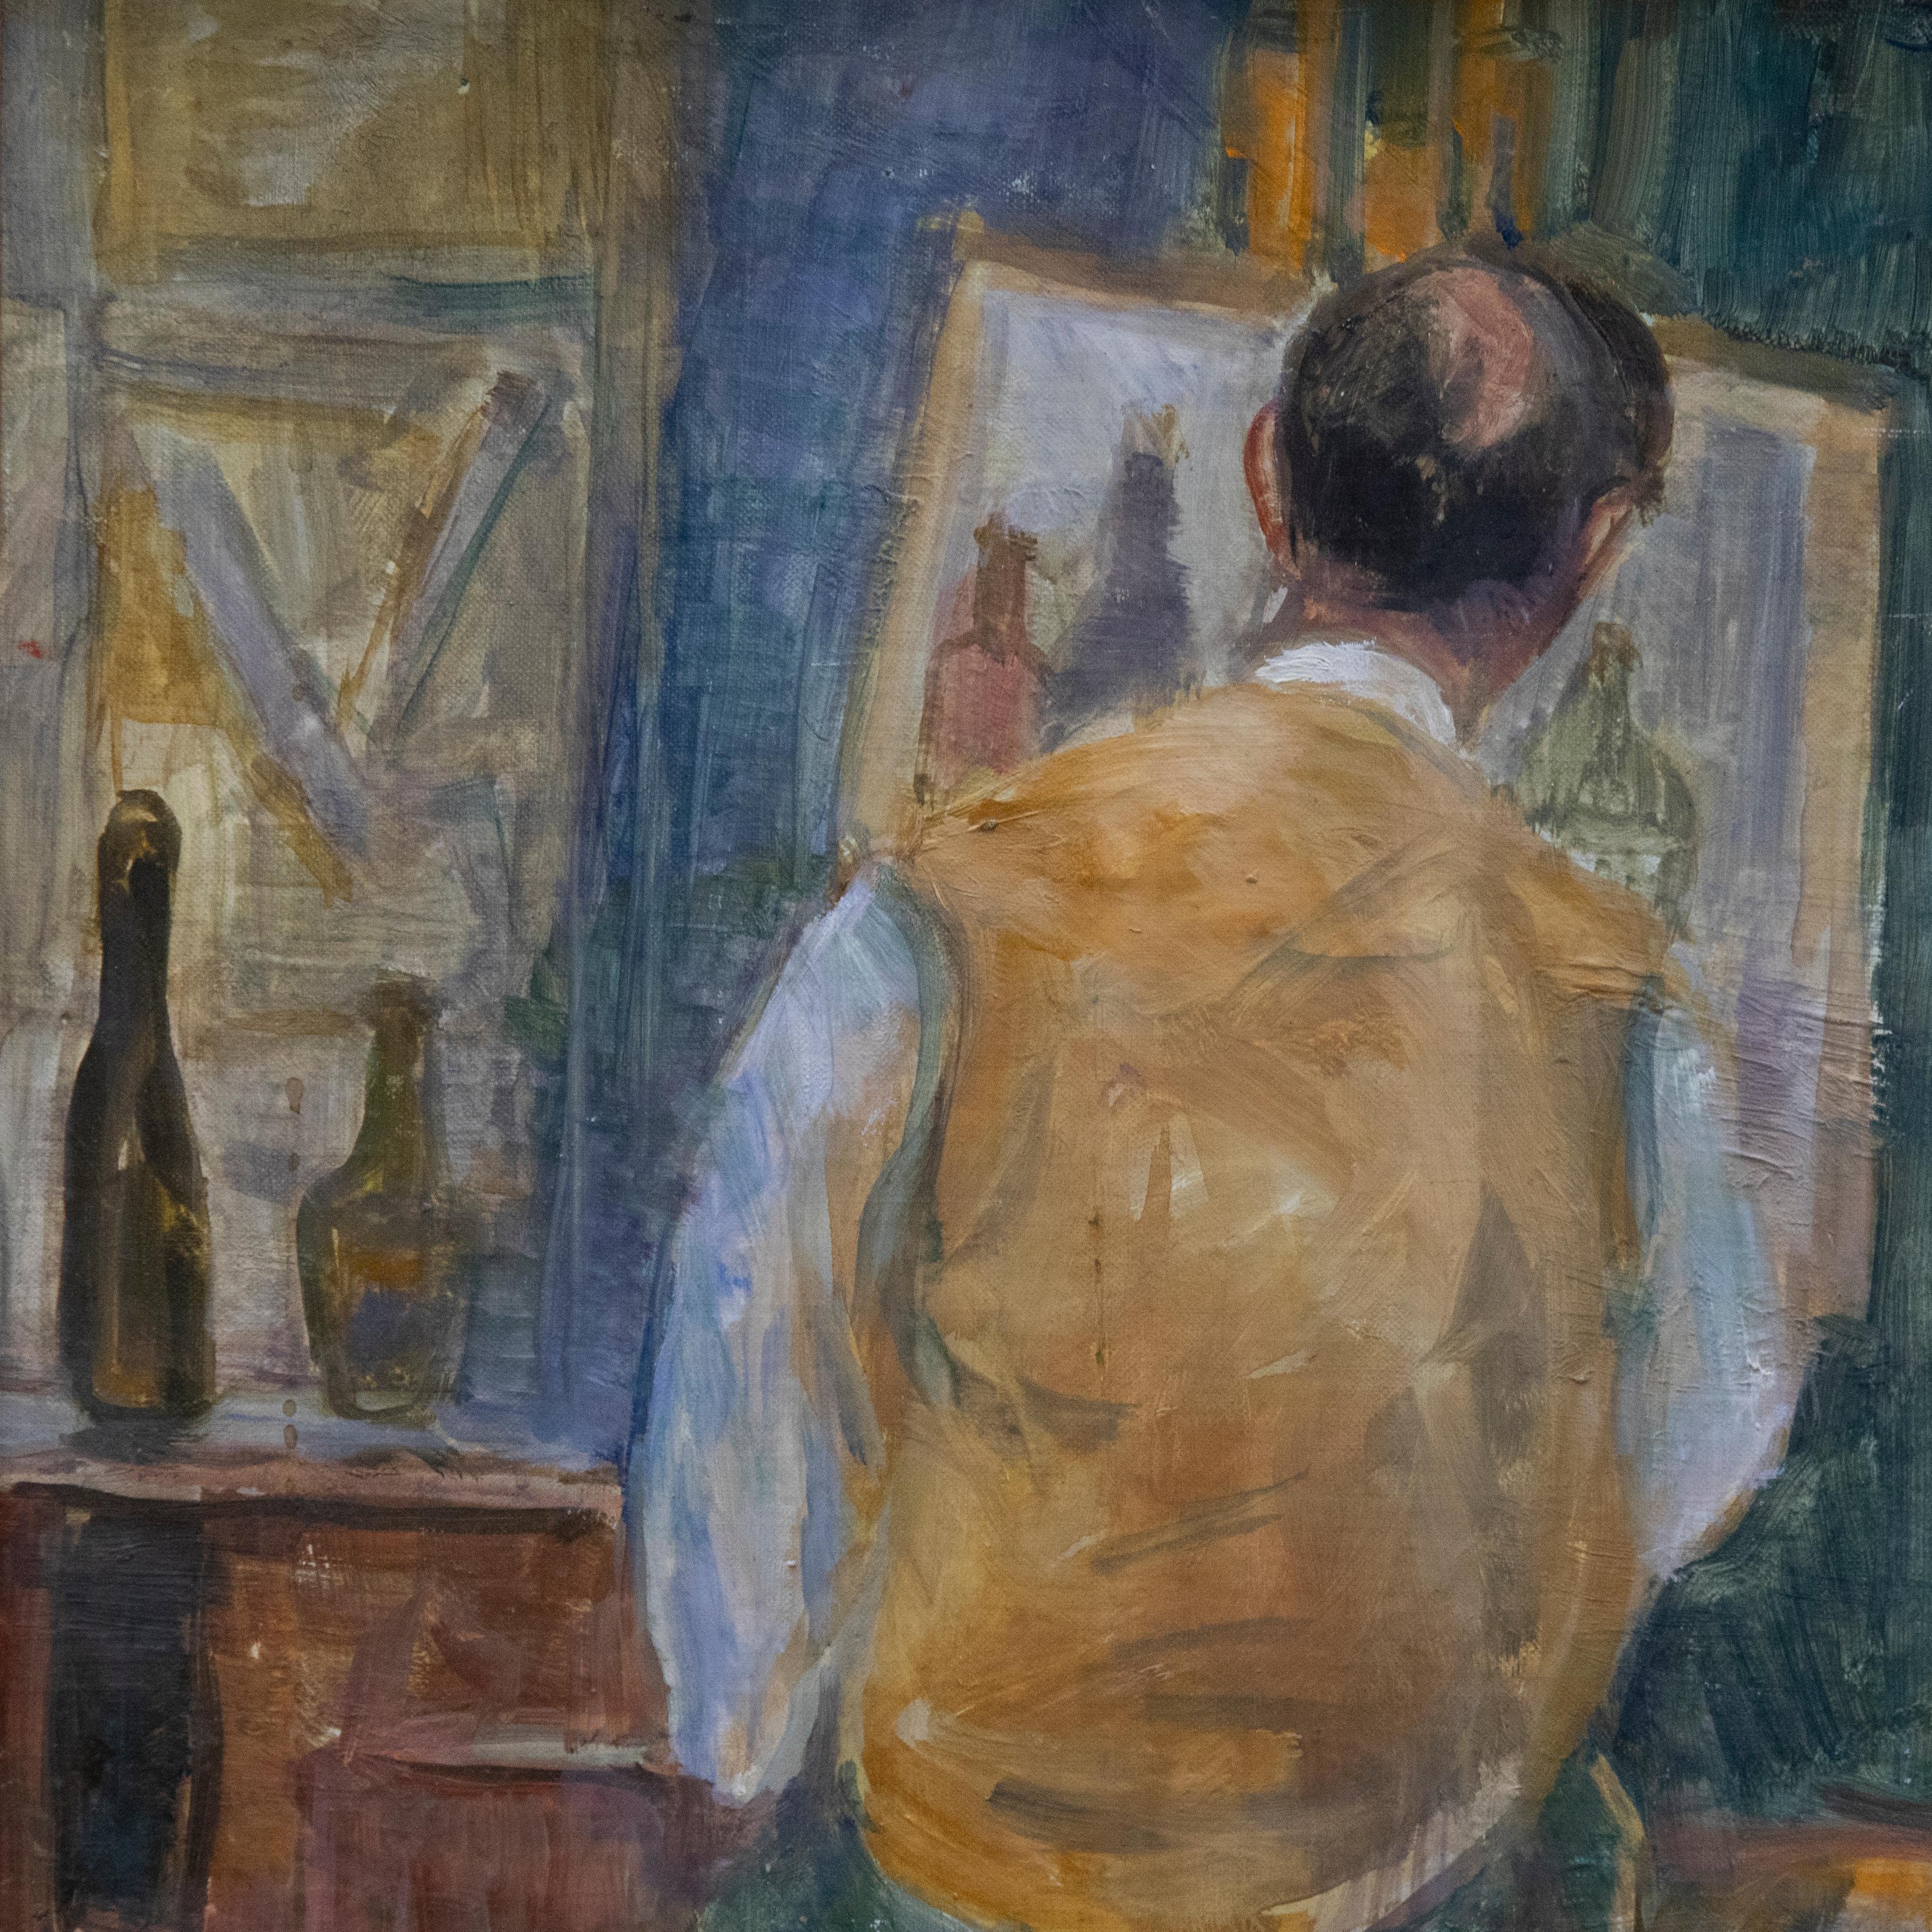 A wonderful mid-century study depicting an artist busy in his studio. He sits in a relaxed manner at his easel, working quickly with the light glinting from glass bottles in the window. A still life is in progress . Bright colours and expressive